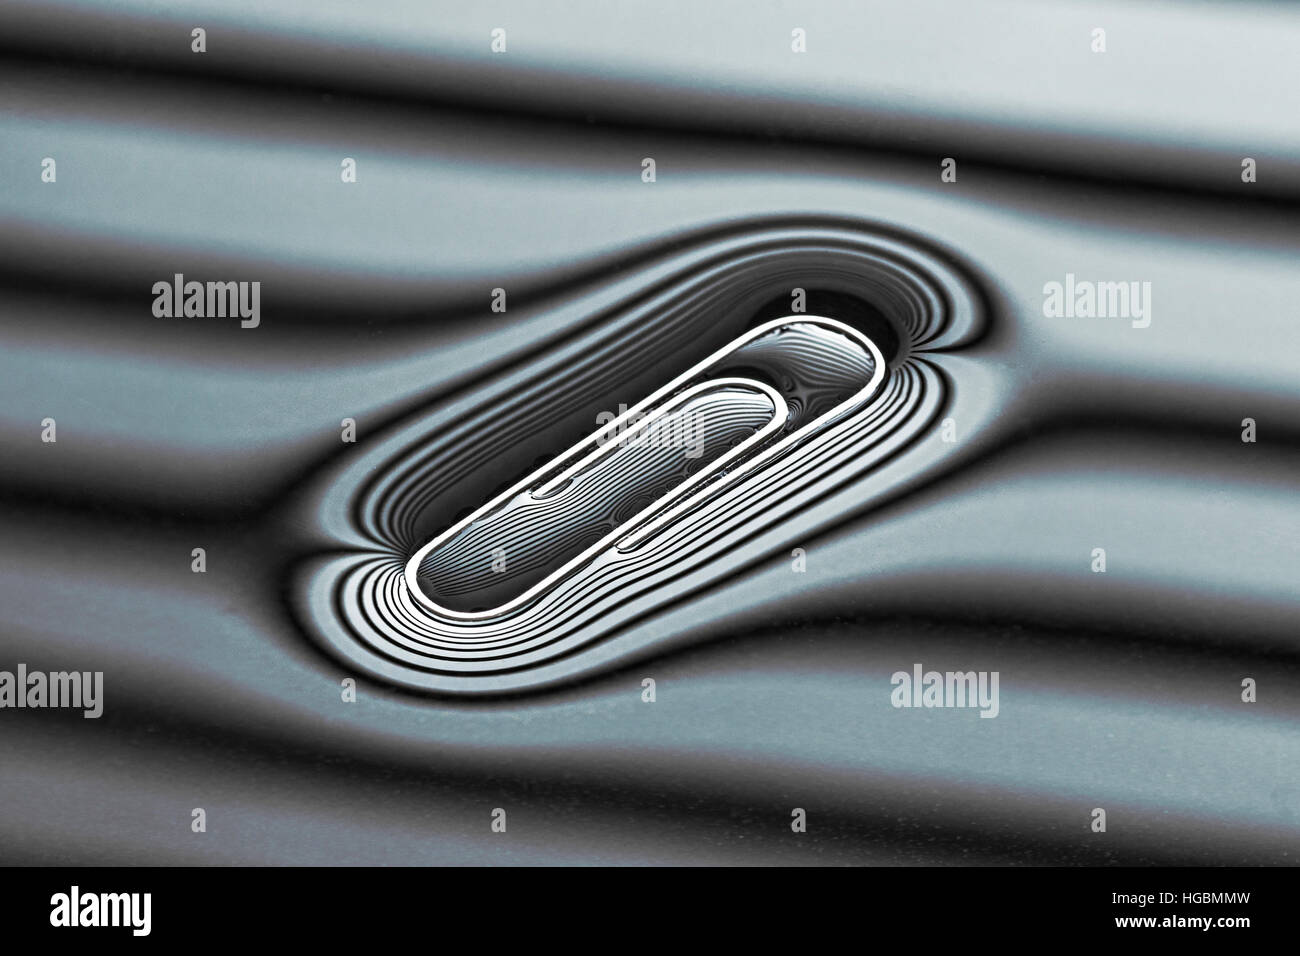 Floating Paperclip.  Paper clip floating on water courtesy of surface tension. Shape of surface water caught in the reflected lines on the surface. Stock Photo